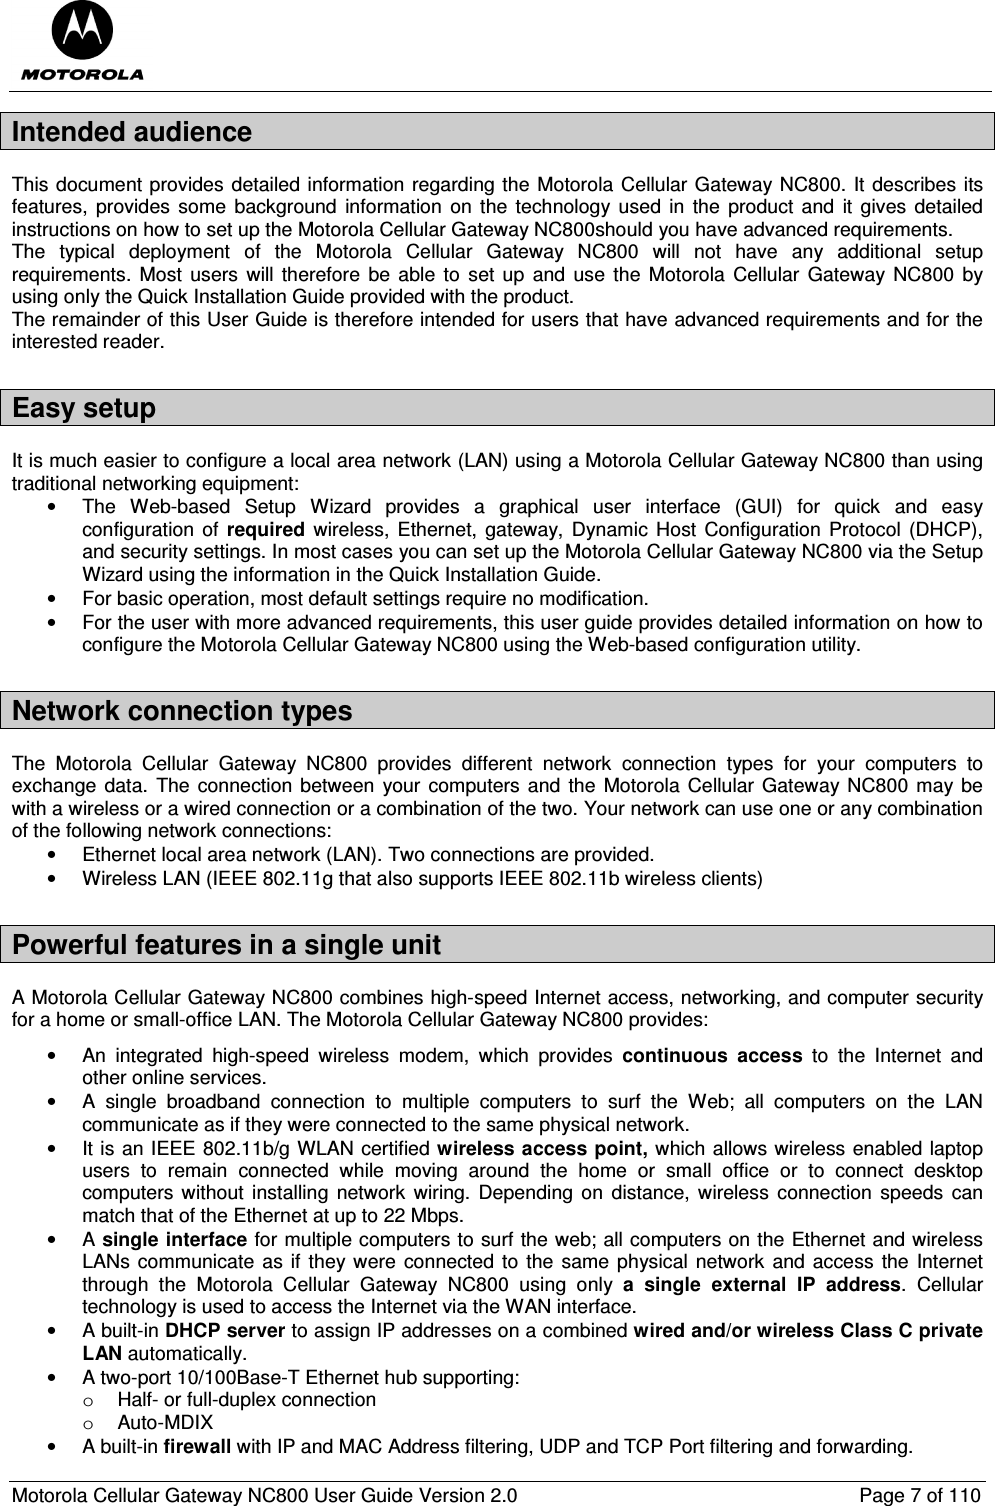  Motorola Cellular Gateway NC800 User Guide Version 2.0     Page 7 of 110  Intended audience This document provides detailed information regarding the Motorola Cellular Gateway NC800. It describes its features,  provides  some  background  information  on  the technology  used in  the product  and  it gives  detailed instructions on how to set up the Motorola Cellular Gateway NC800should you have advanced requirements. The  typical  deployment  of  the  Motorola  Cellular  Gateway  NC800  will  not  have  any  additional  setup requirements.  Most  users  will  therefore  be  able to  set up  and  use the  Motorola  Cellular Gateway NC800 by using only the Quick Installation Guide provided with the product. The remainder of this User Guide is therefore intended for users that have advanced requirements and for the interested reader. Easy setup It is much easier to configure a local area network (LAN) using a Motorola Cellular Gateway NC800 than using traditional networking equipment: •  The  Web-based  Setup  Wizard  provides  a  graphical  user  interface  (GUI)  for  quick  and  easy configuration  of  required  wireless, Ethernet,  gateway,  Dynamic Host Configuration  Protocol  (DHCP), and security settings. In most cases you can set up the Motorola Cellular Gateway NC800 via the Setup Wizard using the information in the Quick Installation Guide. •  For basic operation, most default settings require no modification. •  For the user with more advanced requirements, this user guide provides detailed information on how to configure the Motorola Cellular Gateway NC800 using the Web-based configuration utility. Network connection types The  Motorola  Cellular  Gateway  NC800  provides  different  network  connection  types  for  your  computers  to exchange data.  The connection between  your computers and  the Motorola Cellular Gateway NC800 may be with a wireless or a wired connection or a combination of the two. Your network can use one or any combination of the following network connections: •  Ethernet local area network (LAN). Two connections are provided. •  Wireless LAN (IEEE 802.11g that also supports IEEE 802.11b wireless clients) Powerful features in a single unit A Motorola Cellular Gateway NC800 combines high-speed Internet access, networking, and computer security for a home or small-office LAN. The Motorola Cellular Gateway NC800 provides: •  An  integrated  high-speed  wireless  modem,  which  provides  continuous  access  to  the  Internet  and other online services. •  A  single  broadband  connection  to  multiple  computers  to  surf  the  Web;  all  computers  on  the  LAN communicate as if they were connected to the same physical network. •  It is an IEEE 802.11b/g WLAN certified wireless access point, which allows wireless enabled laptop users  to  remain  connected  while  moving  around  the  home  or  small  office  or  to  connect  desktop computers without  installing  network  wiring.  Depending on  distance,  wireless  connection  speeds  can match that of the Ethernet at up to 22 Mbps. •  A single interface for multiple computers to surf the web; all computers on the Ethernet and wireless LANs communicate  as if  they were  connected to  the same physical network and access the Internet through  the  Motorola  Cellular  Gateway  NC800  using  only  a  single  external  IP  address.  Cellular technology is used to access the Internet via the WAN interface. •  A built-in DHCP server to assign IP addresses on a combined wired and/or wireless Class C private LAN automatically. •  A two-port 10/100Base-T Ethernet hub supporting: o  Half- or full-duplex connection o  Auto-MDIX •  A built-in firewall with IP and MAC Address filtering, UDP and TCP Port filtering and forwarding. 